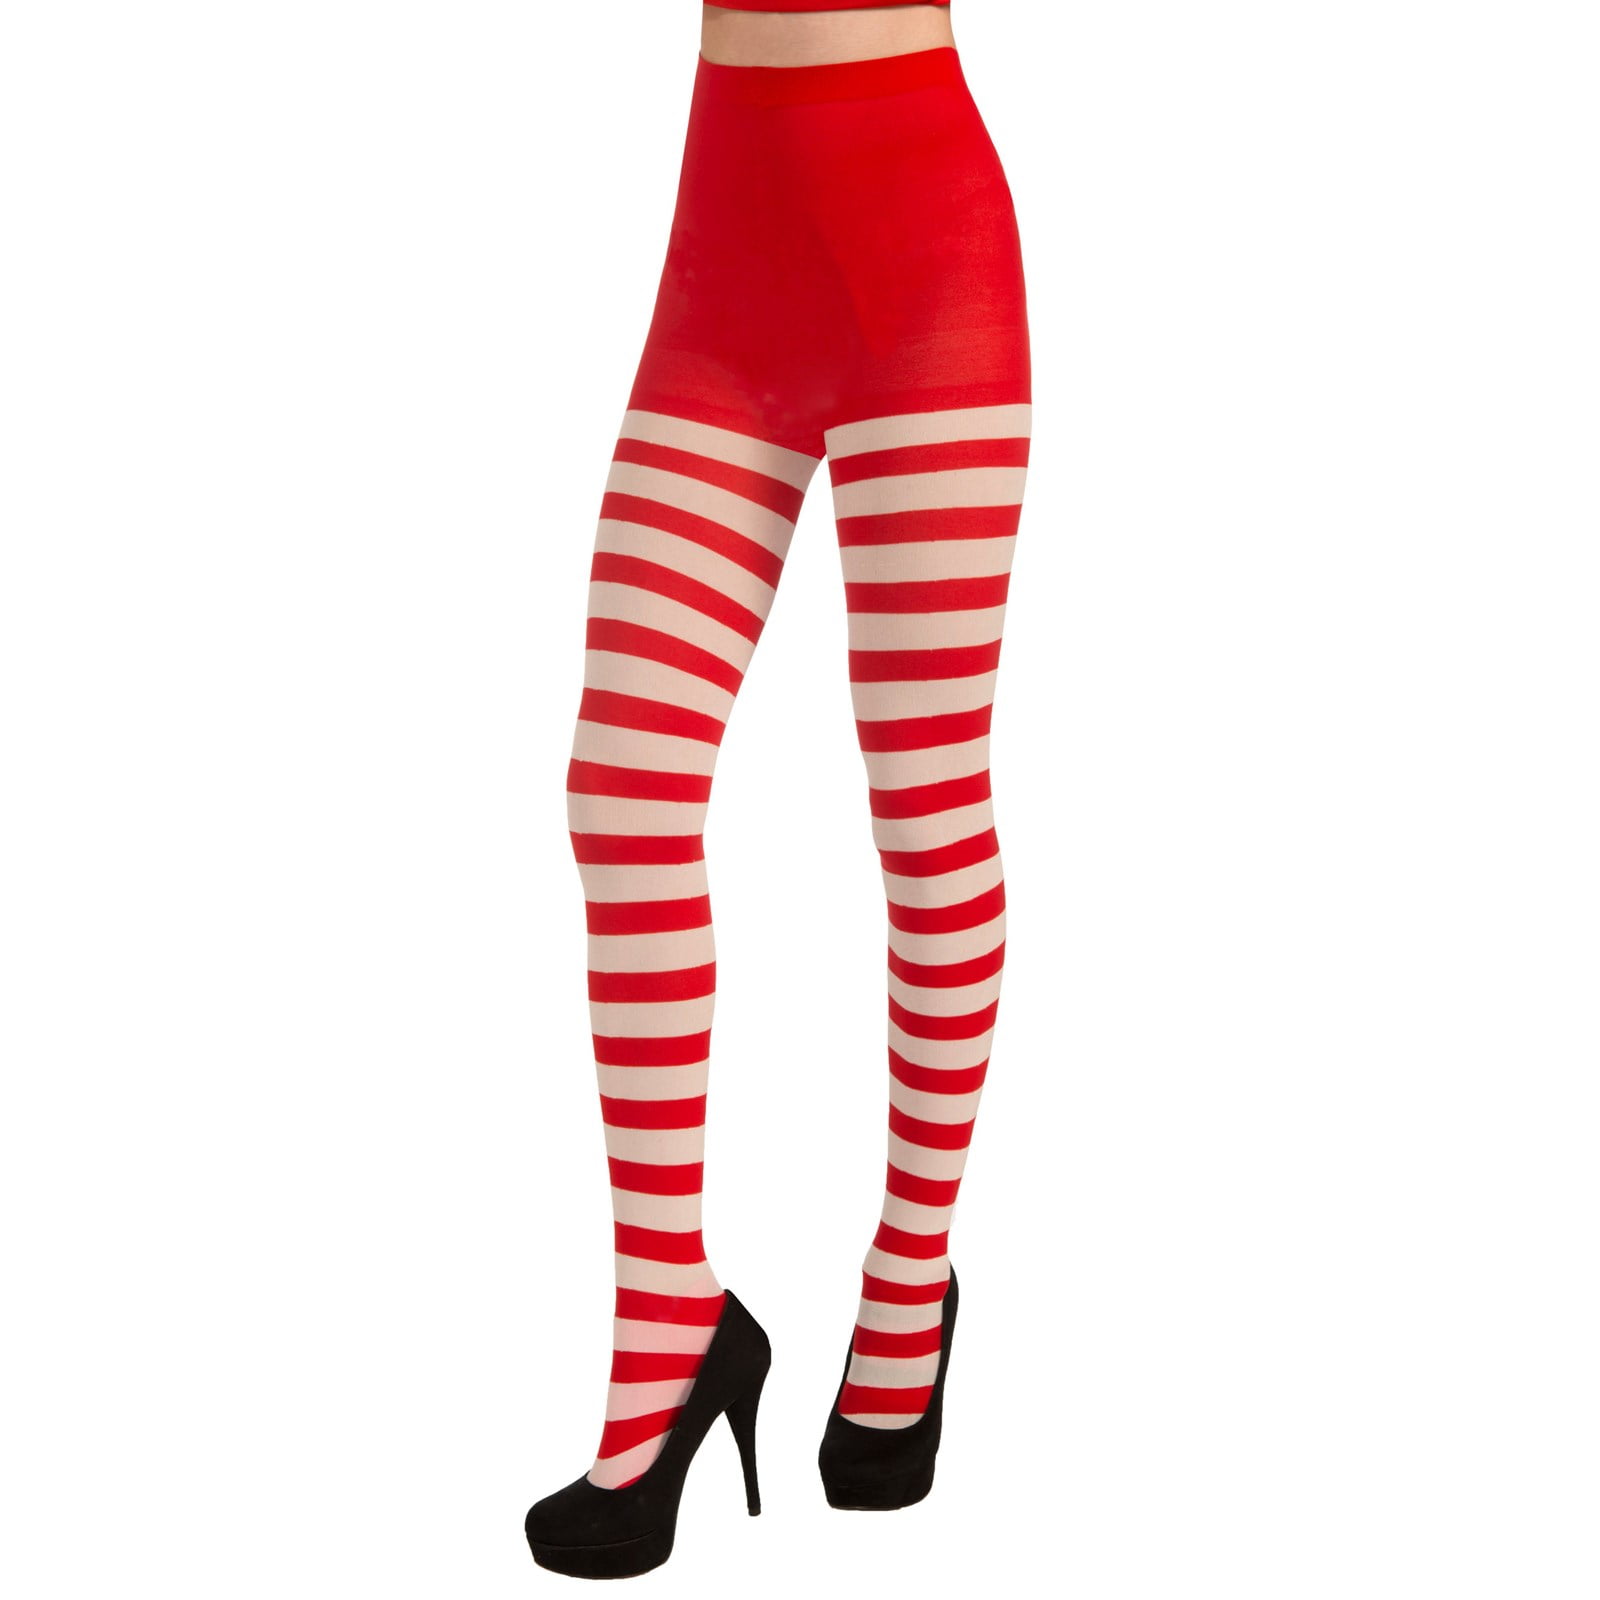 Leg Avenue Womens Christmas Holiday Spandex Tights One Size Red//White Candy